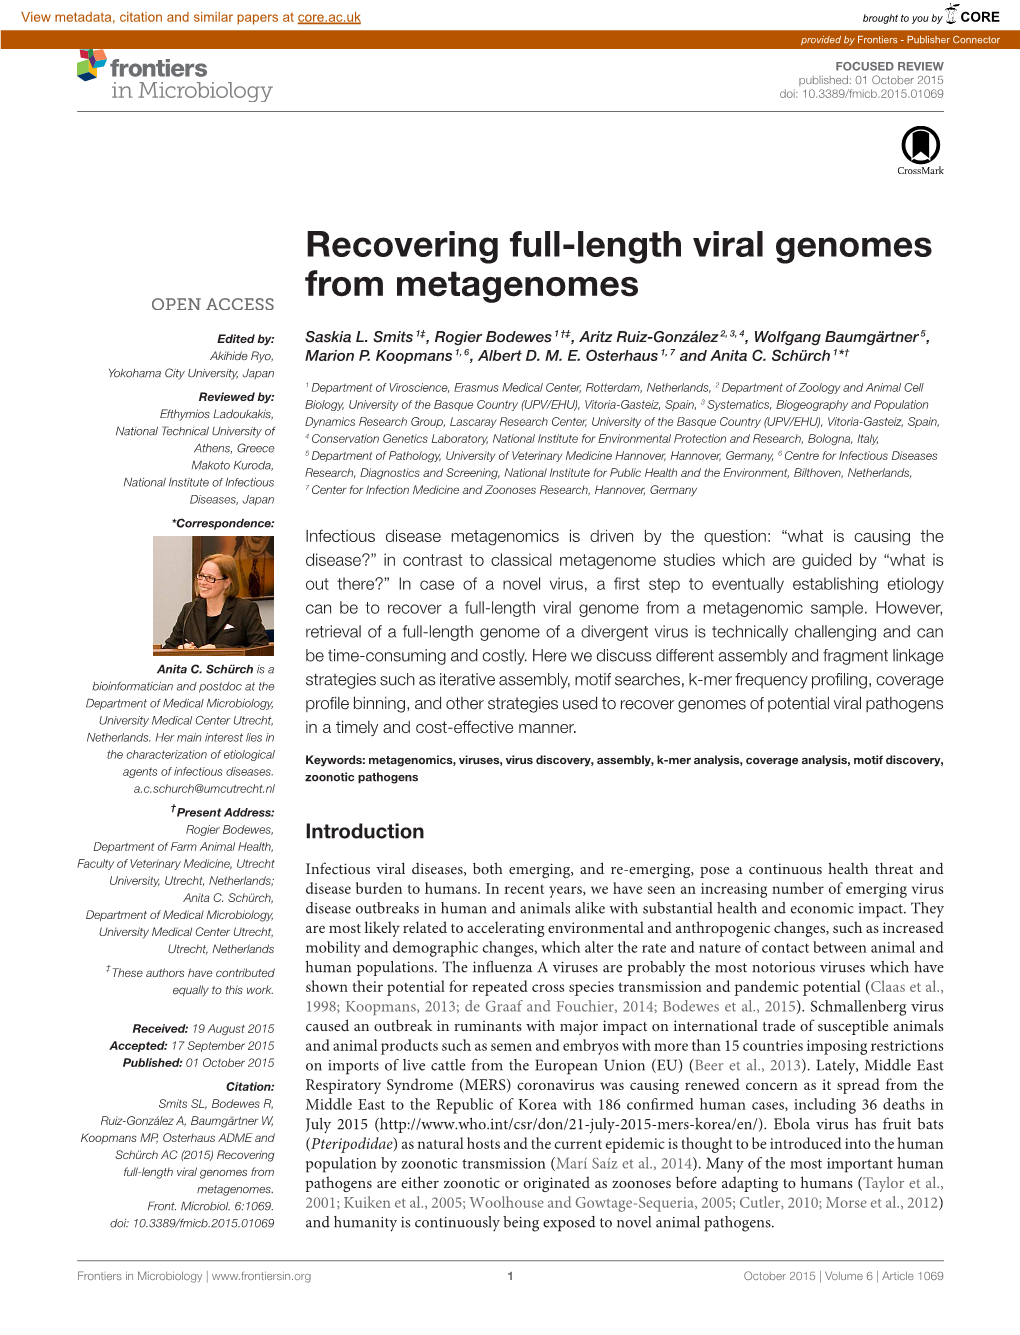 Recovering Full-Length Viral Genomes from Metagenomes